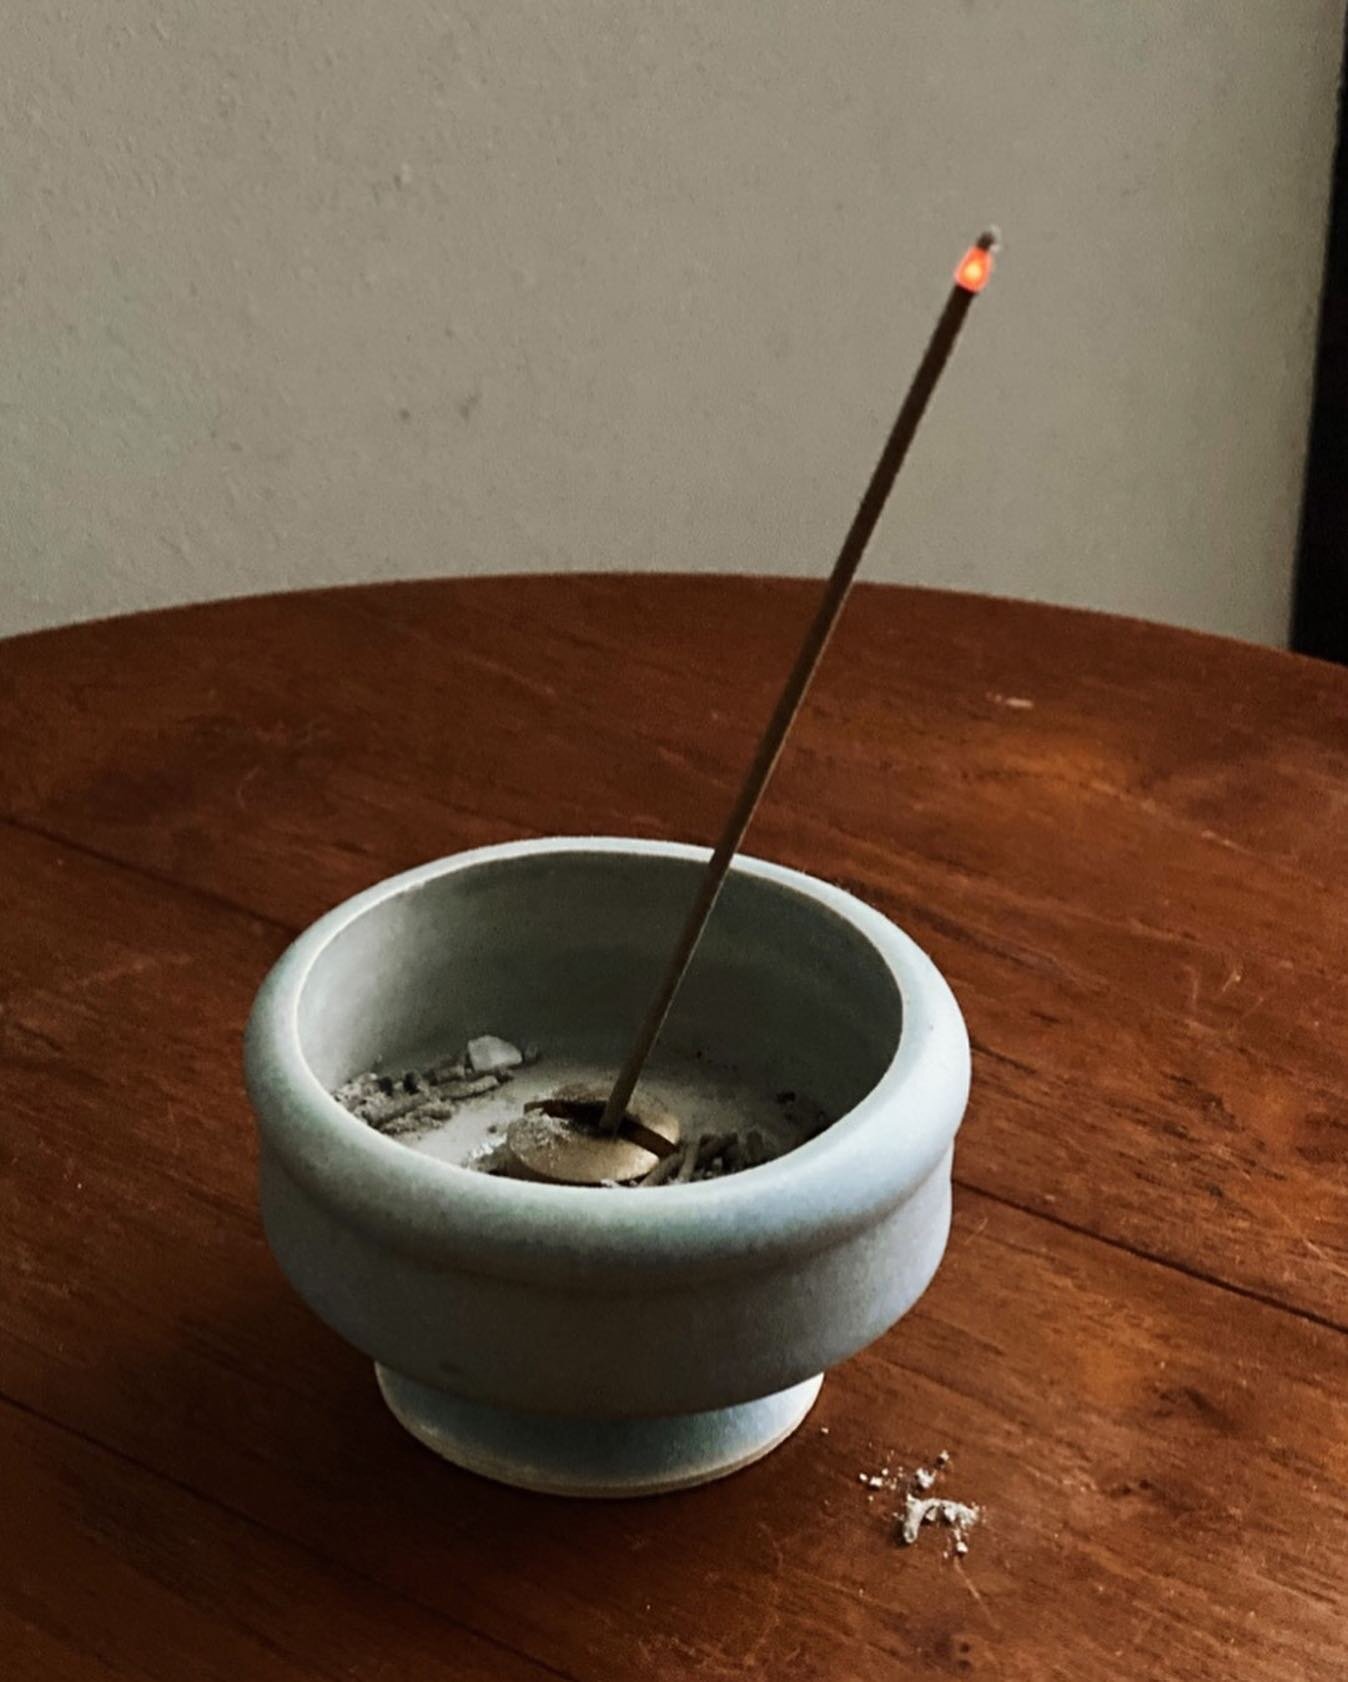 Incense burning is one of the best way to self meditate with. However, the cleaning process can be quite irritating especially when ashes drop outside the container. 

#london #design #zen #incenseburner #incense #incenseburner #interiordesign #art #